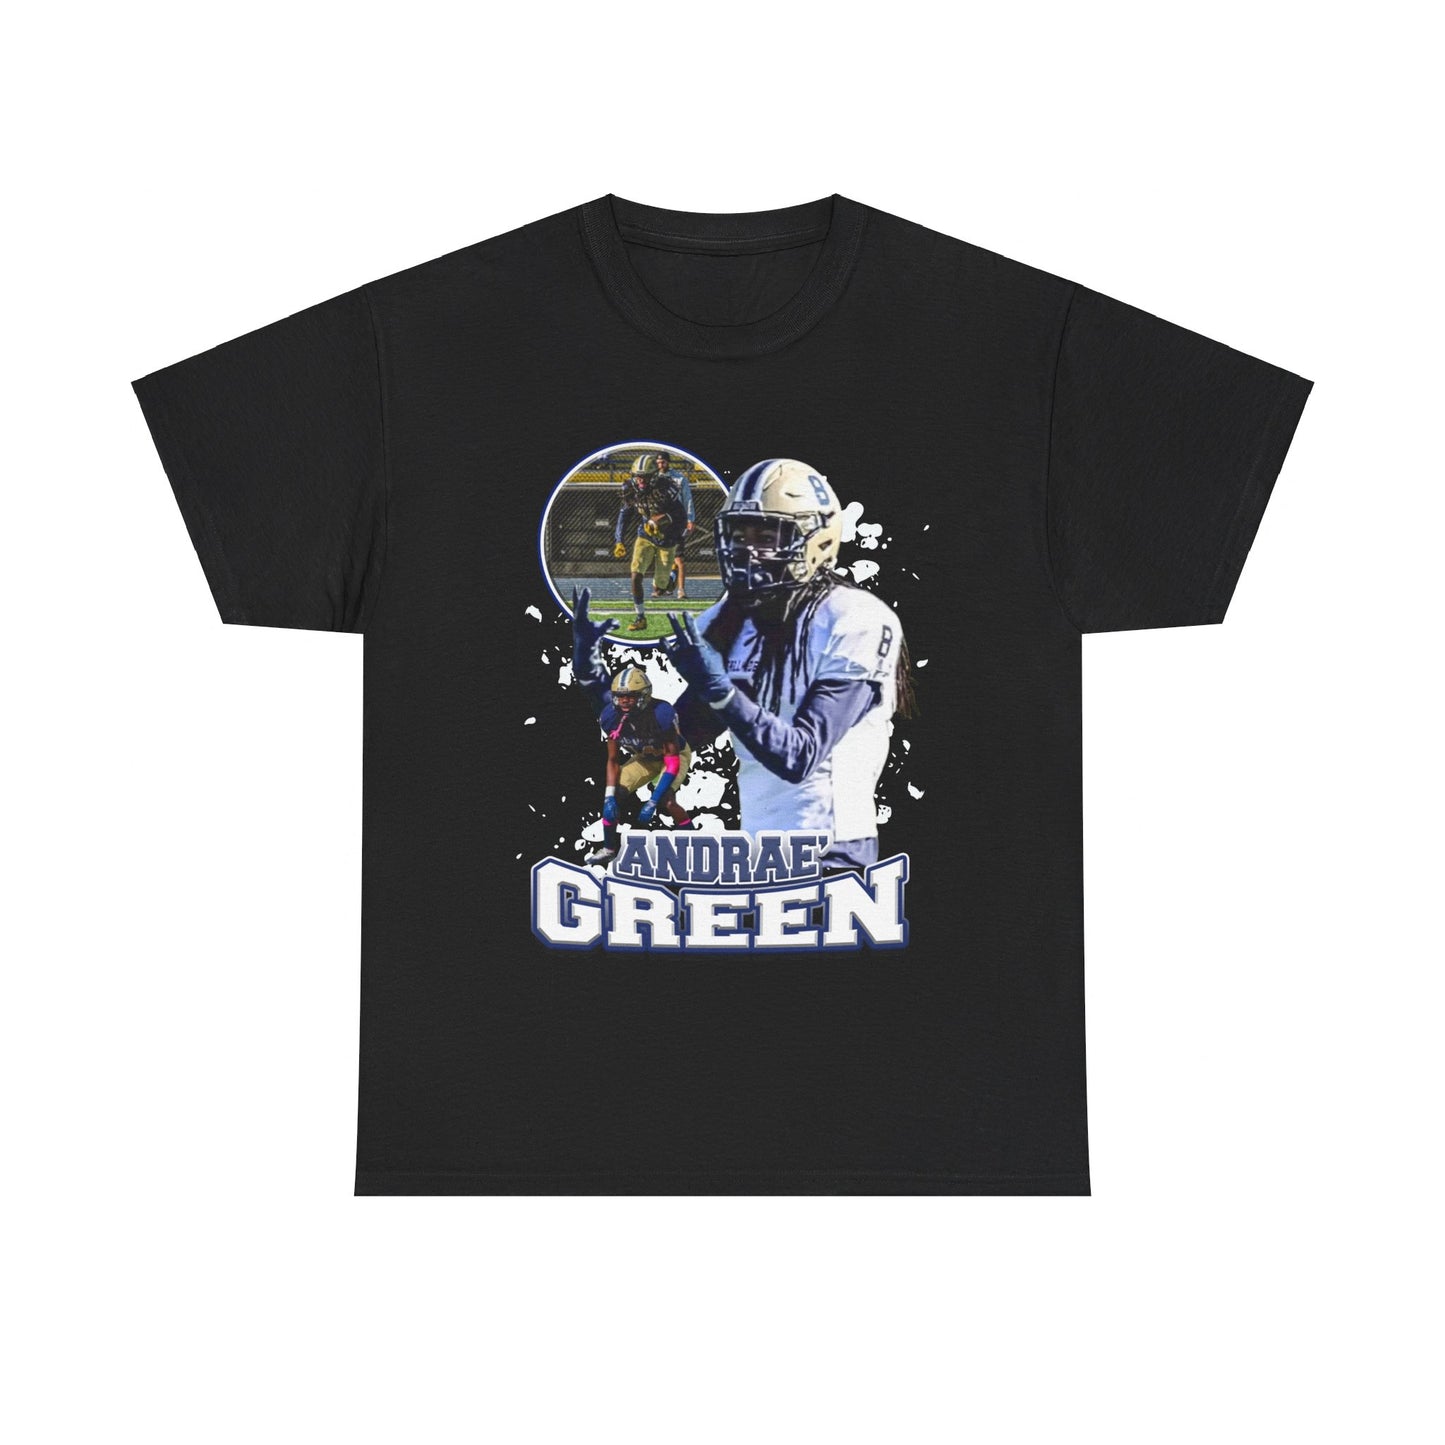 Andrae’ Green Graphic Tee